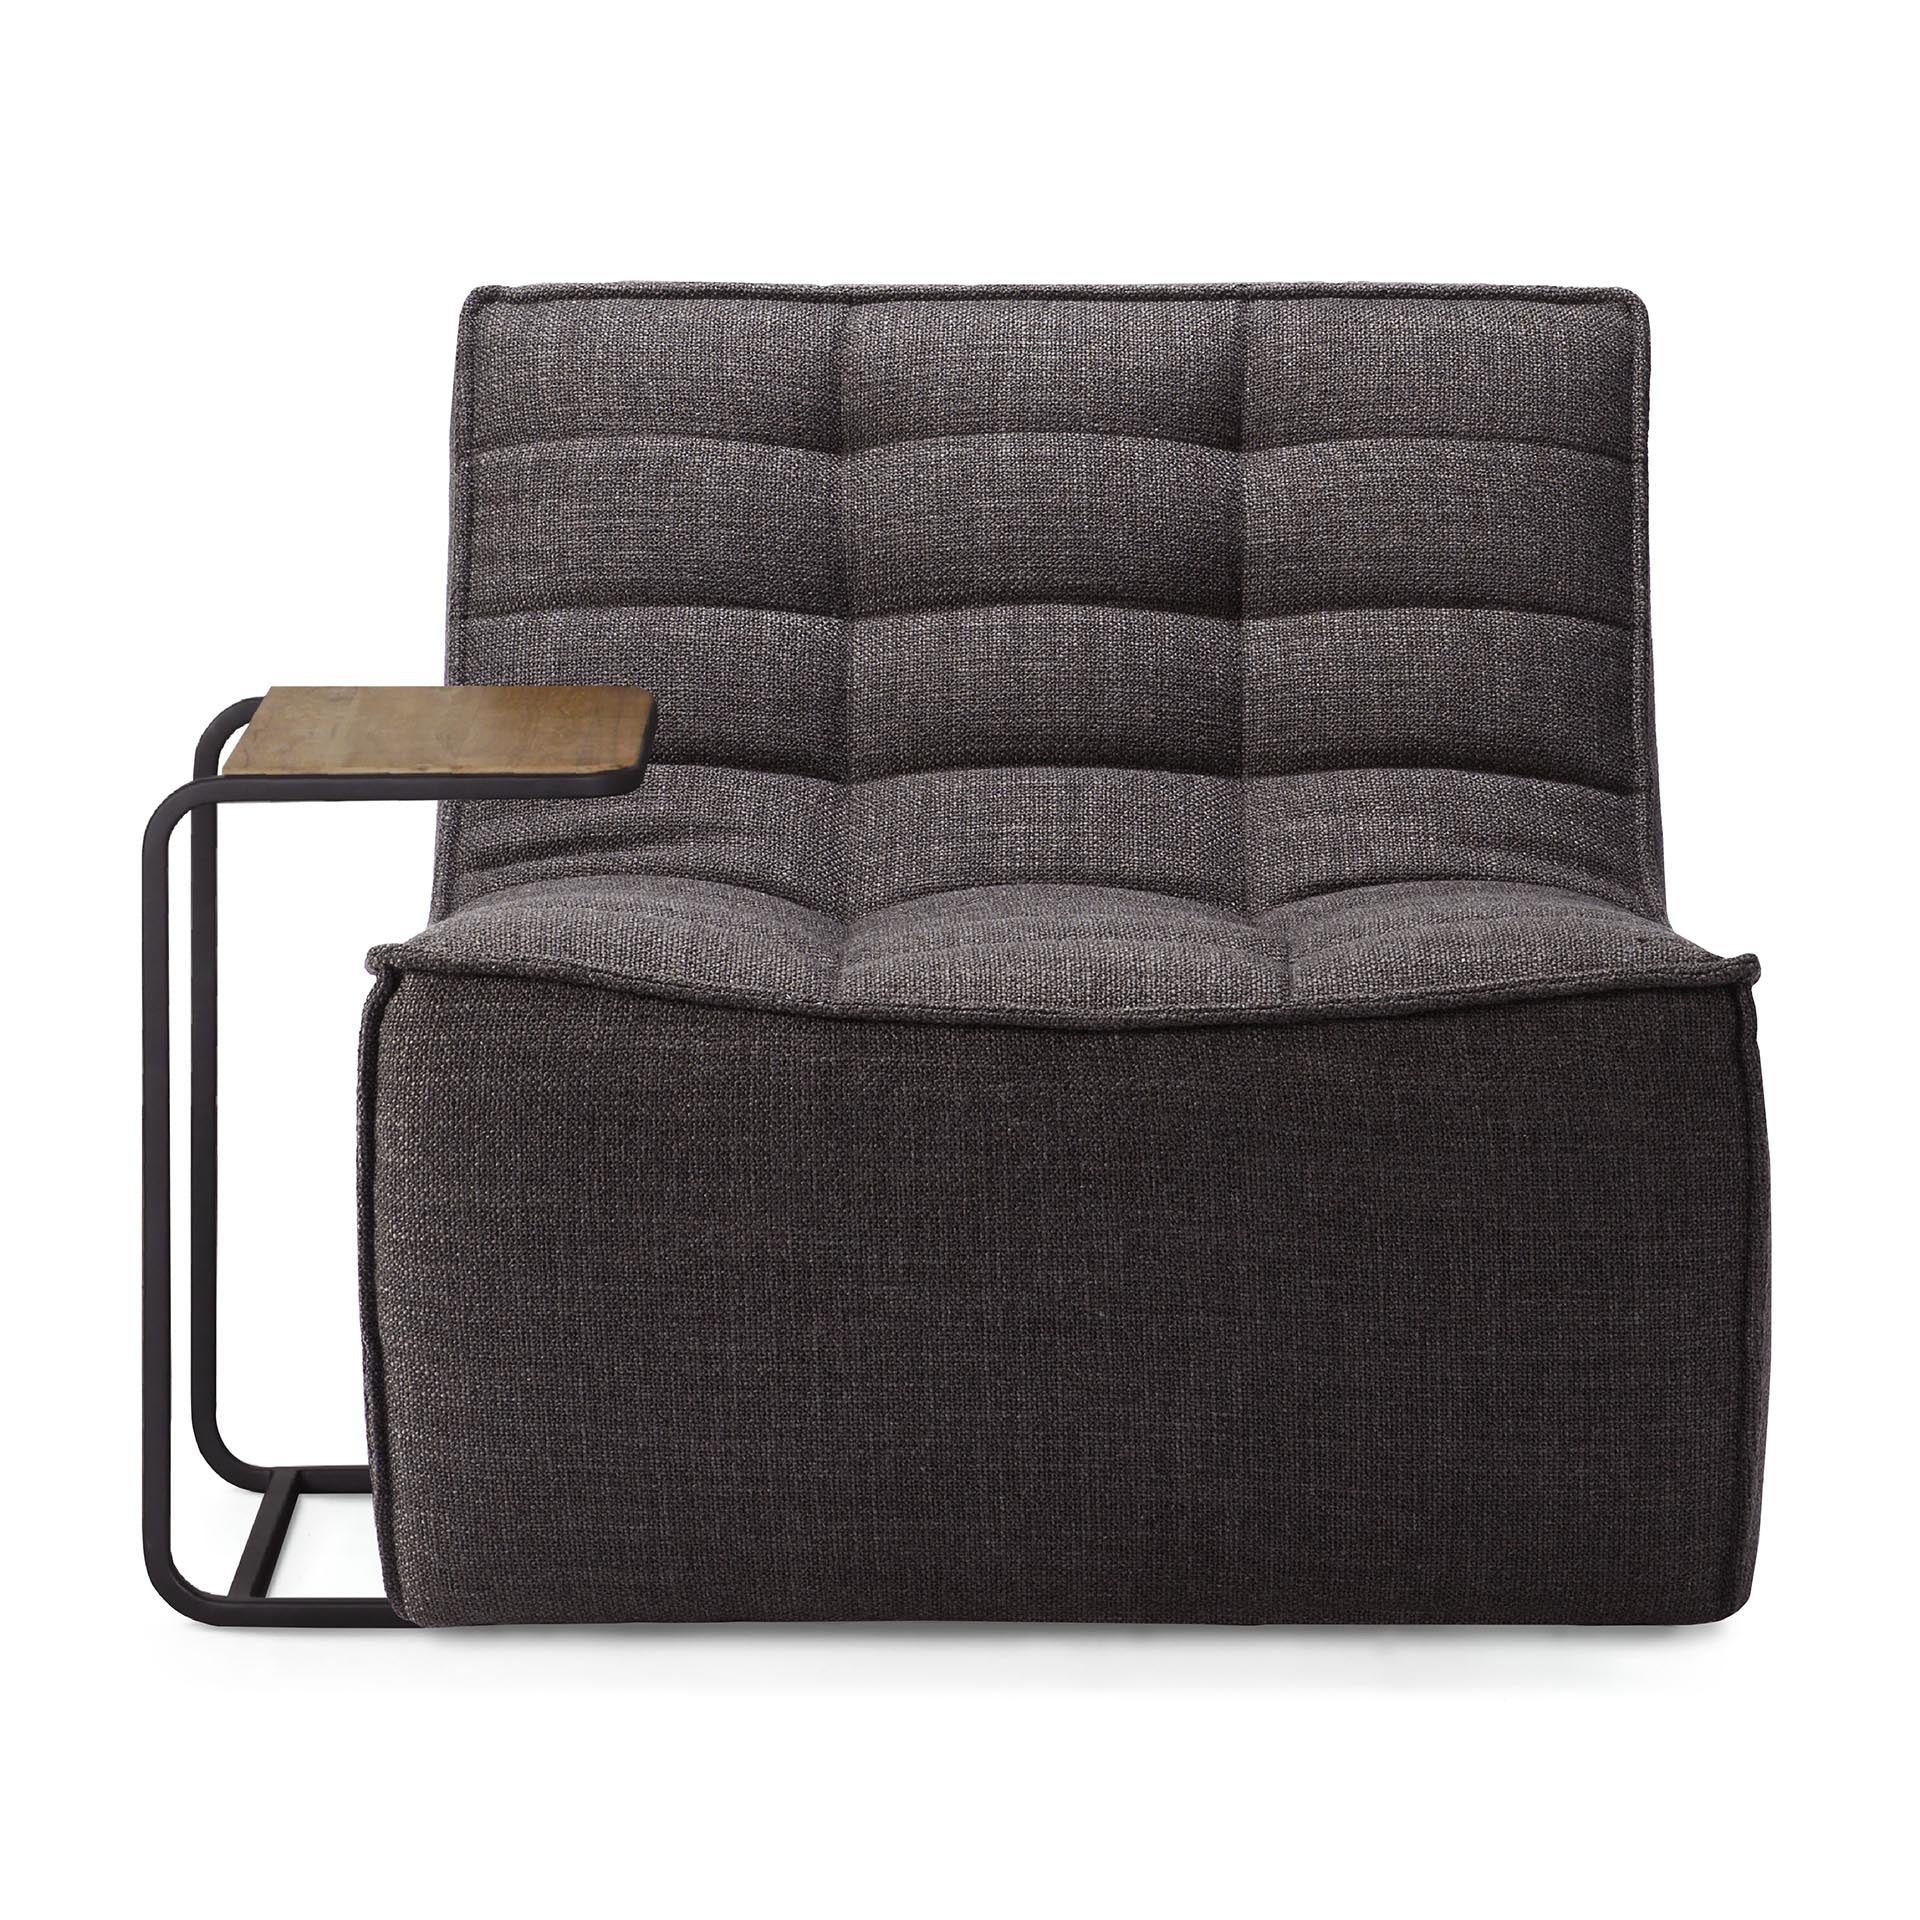 N701 Ethnicraft Slouch Sofa in Dark Grey fabric available from Make Your House A Home, Bendigo, Victoria, Australia